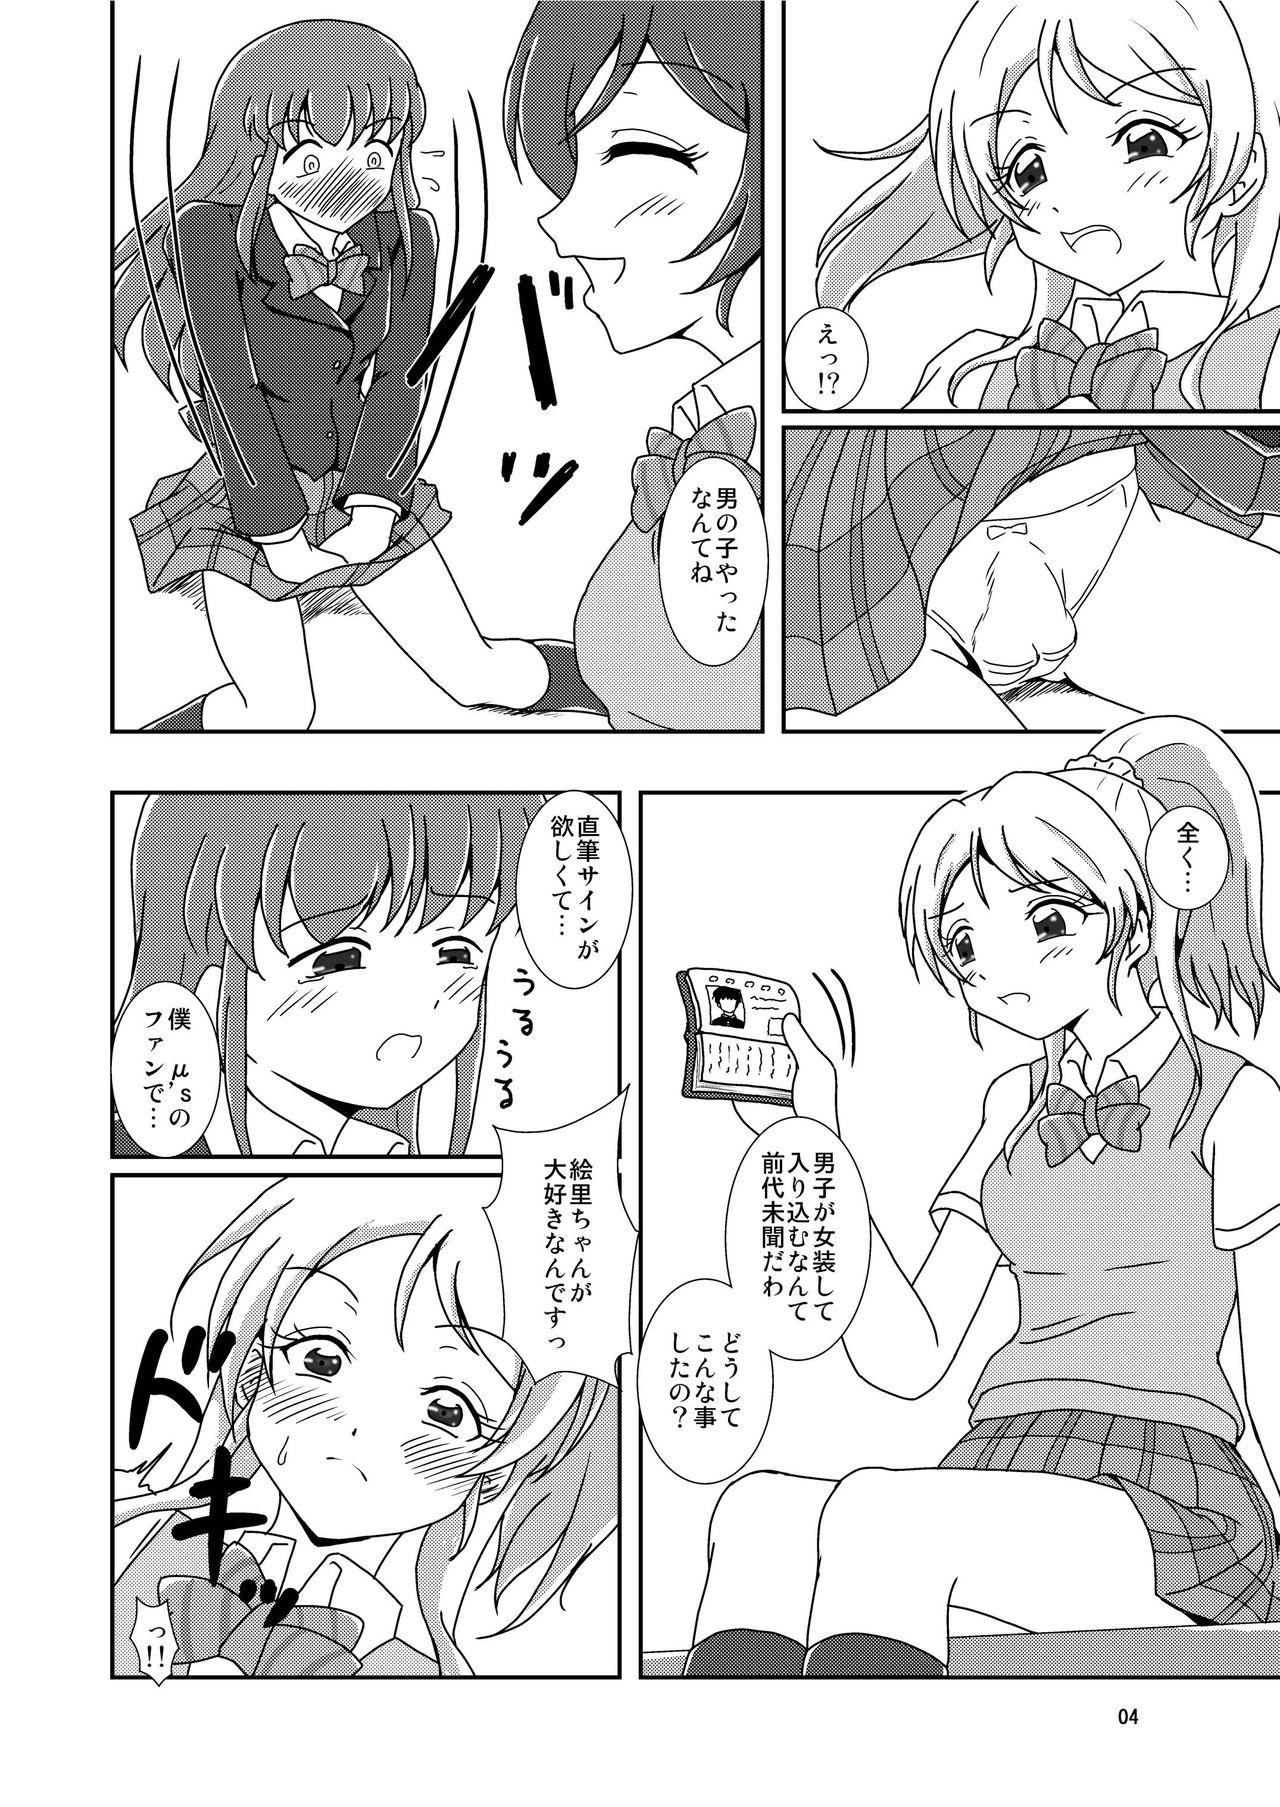 Livecams コキライブ! - Love live Glamour - Page 6